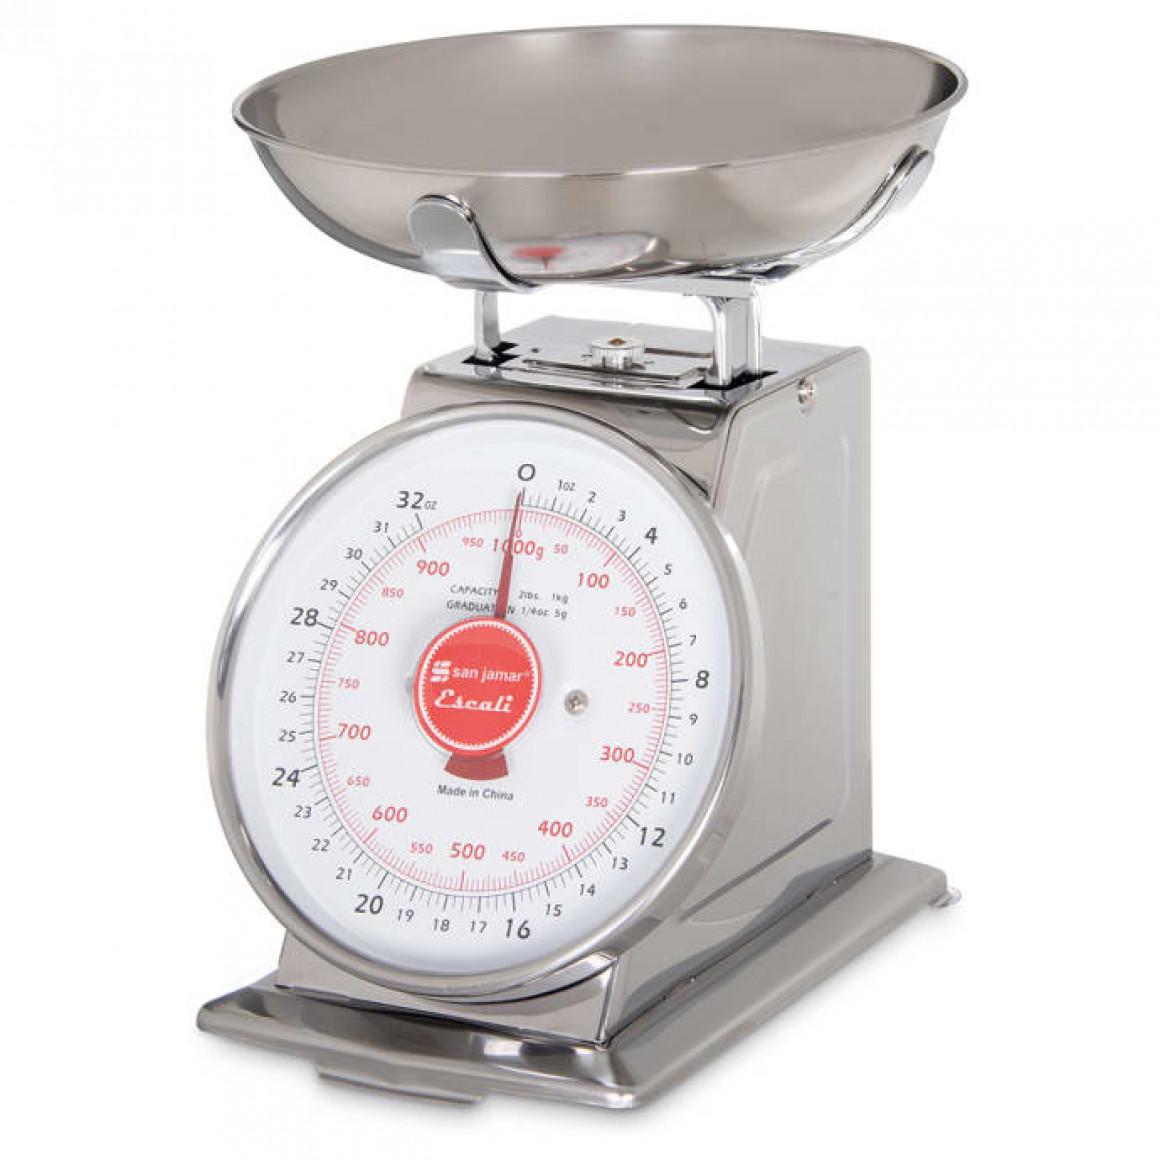 Mechanical Dial Scale with Bowl, 11 Lb / 5 Kg.